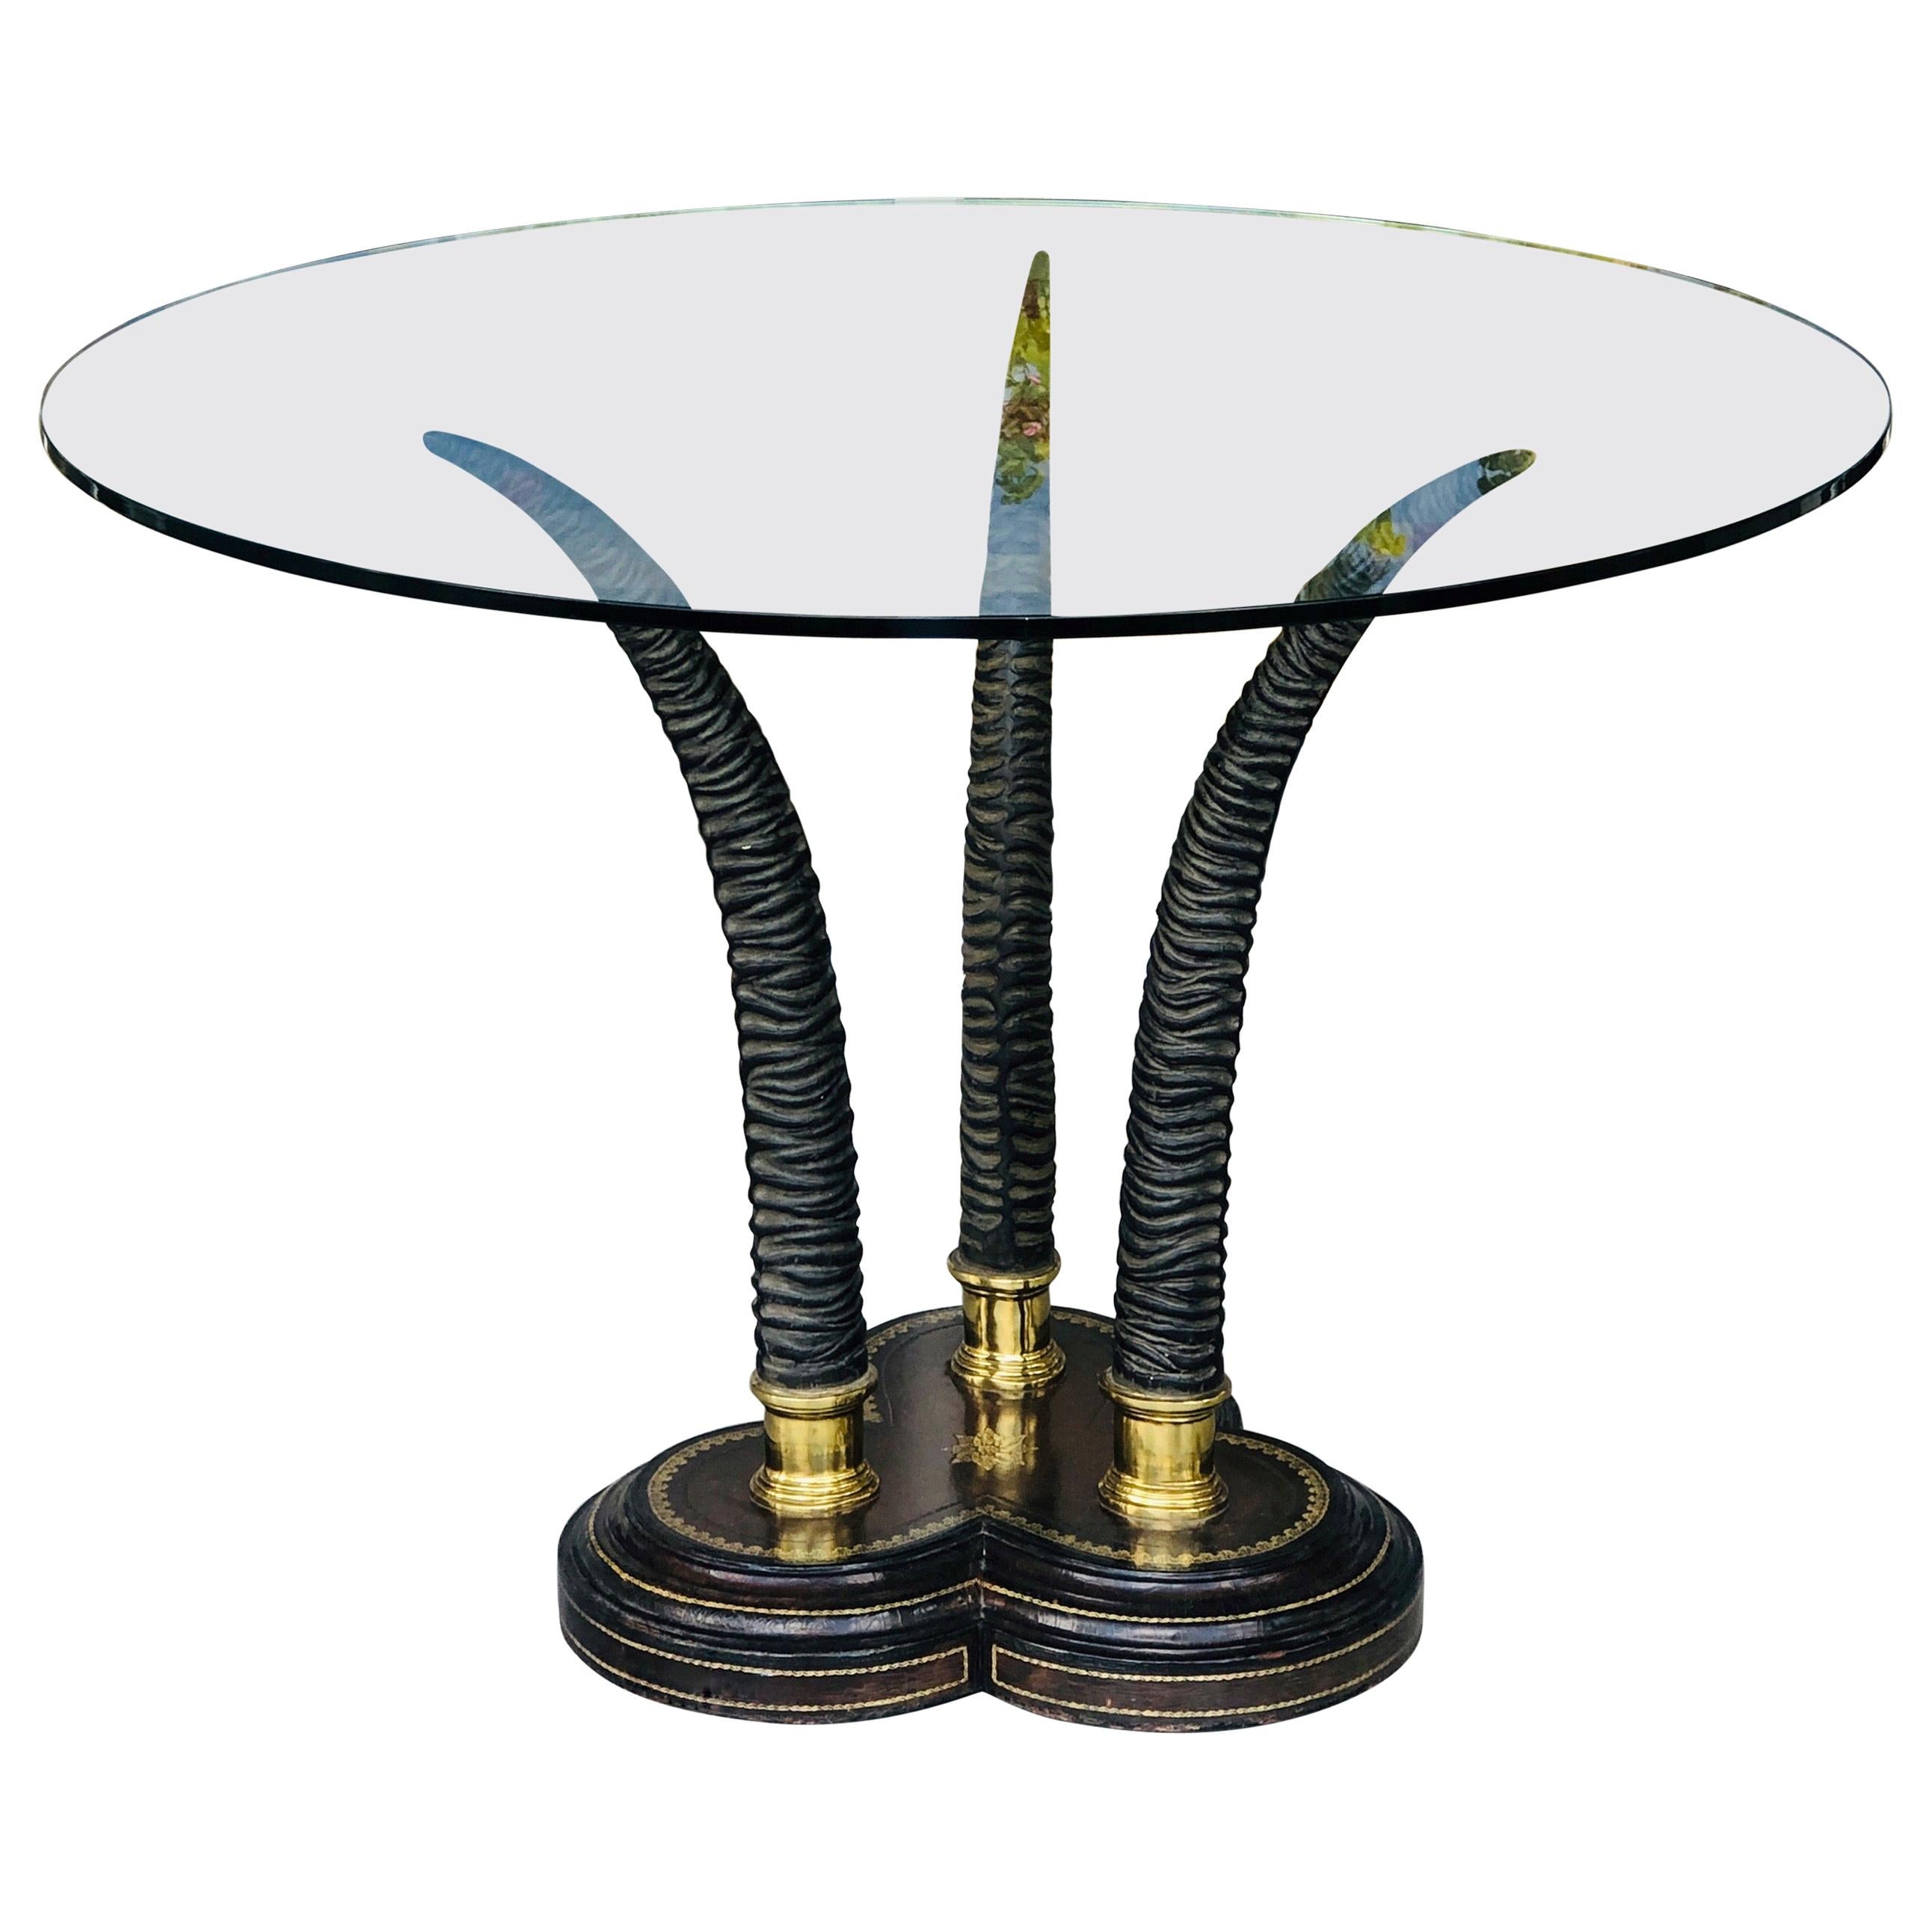 Maitland Smith Round Brass and Leather Table with Horns